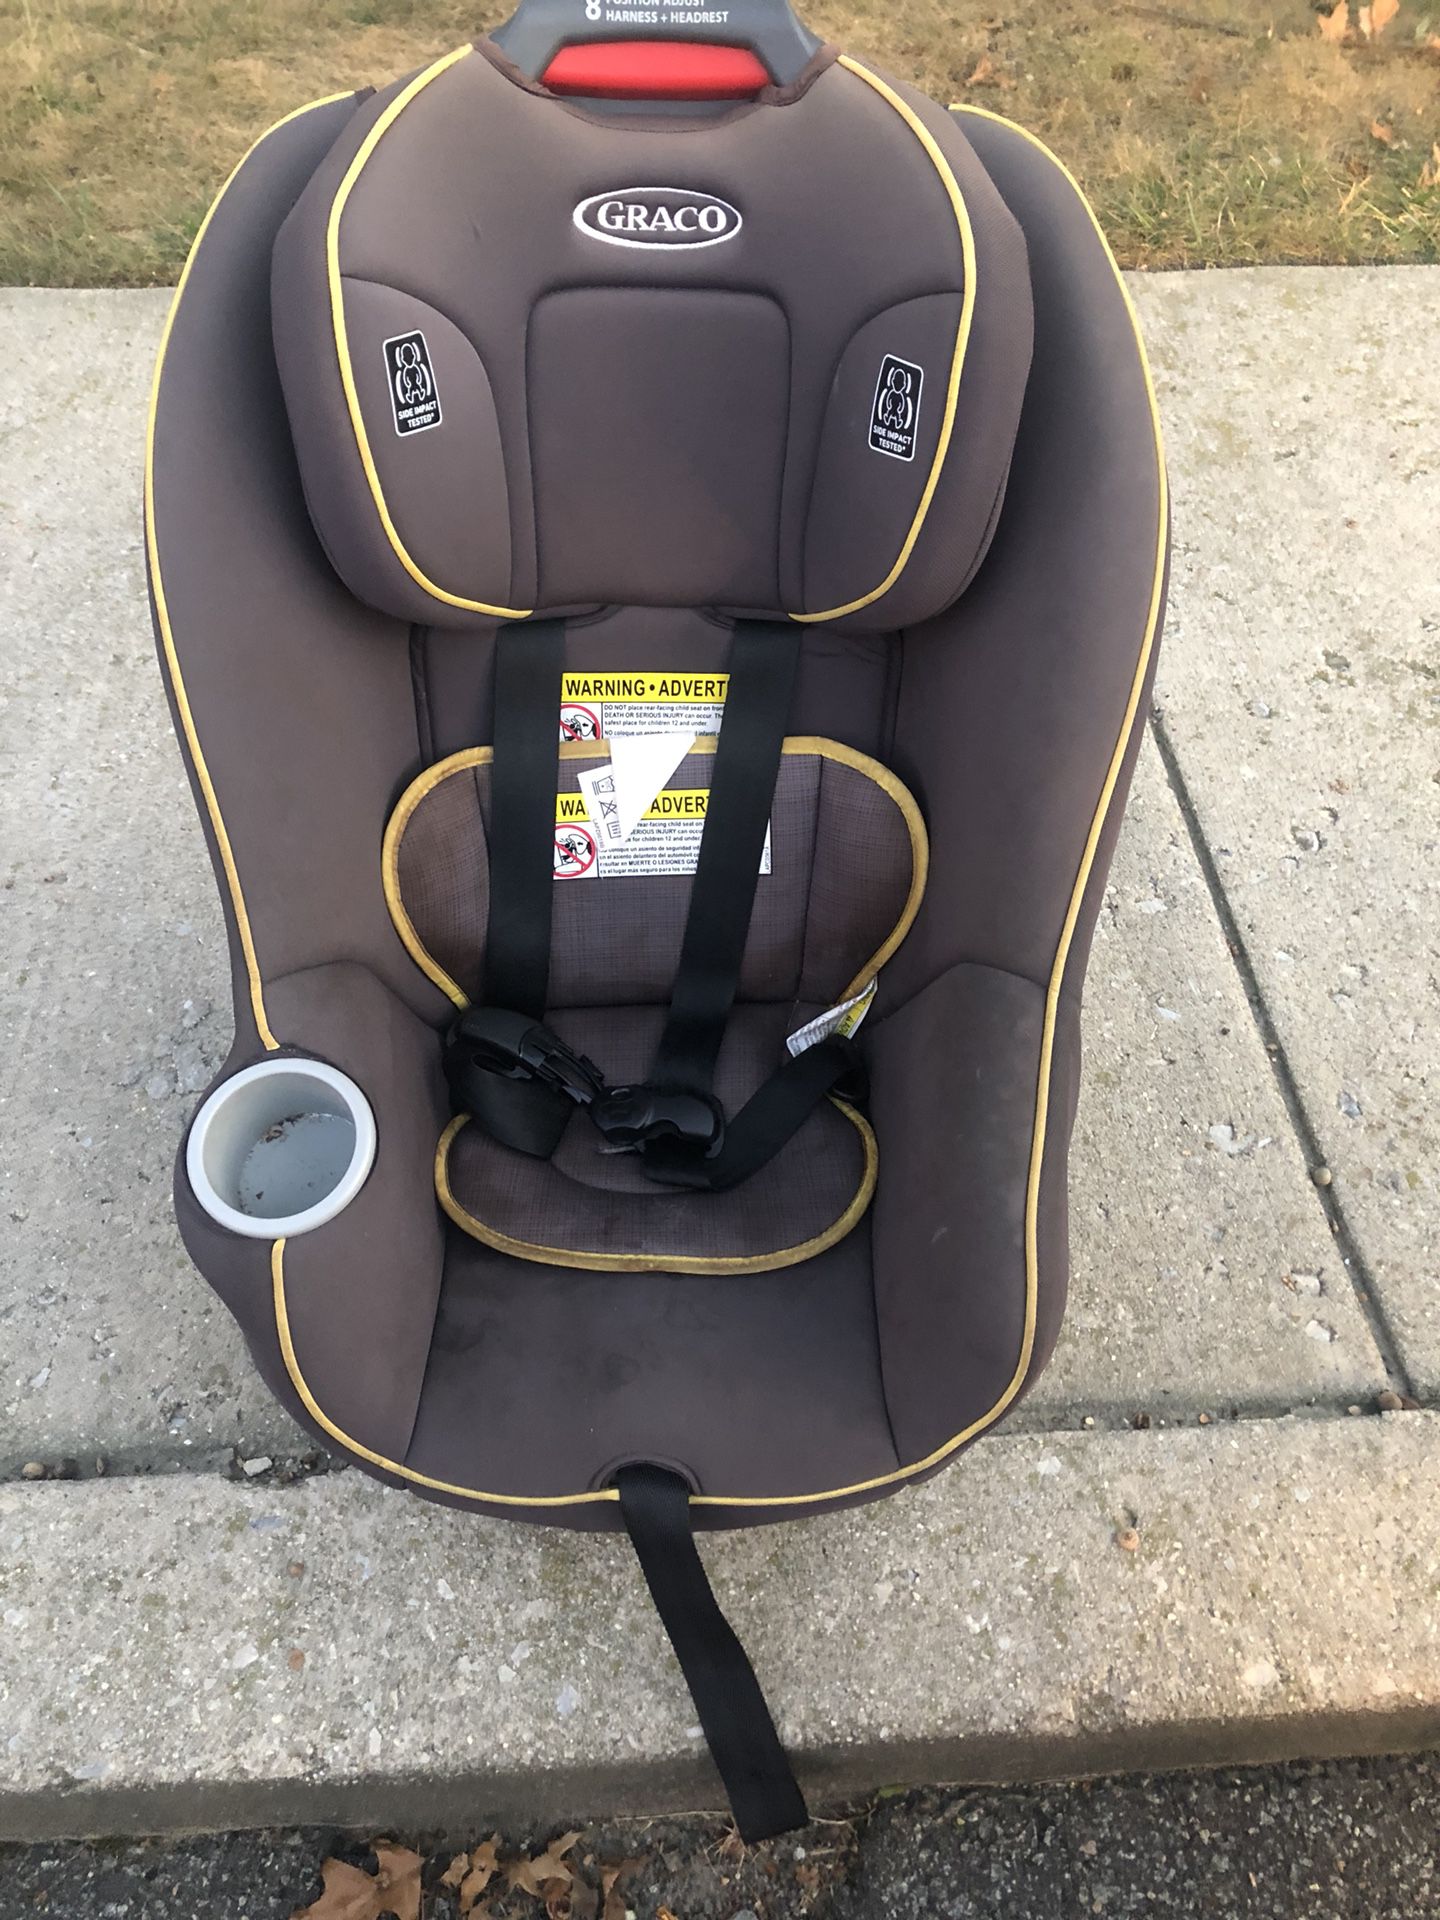 Graco rear and forward facing car seat. In great condition barely used! Also will include booster seat.